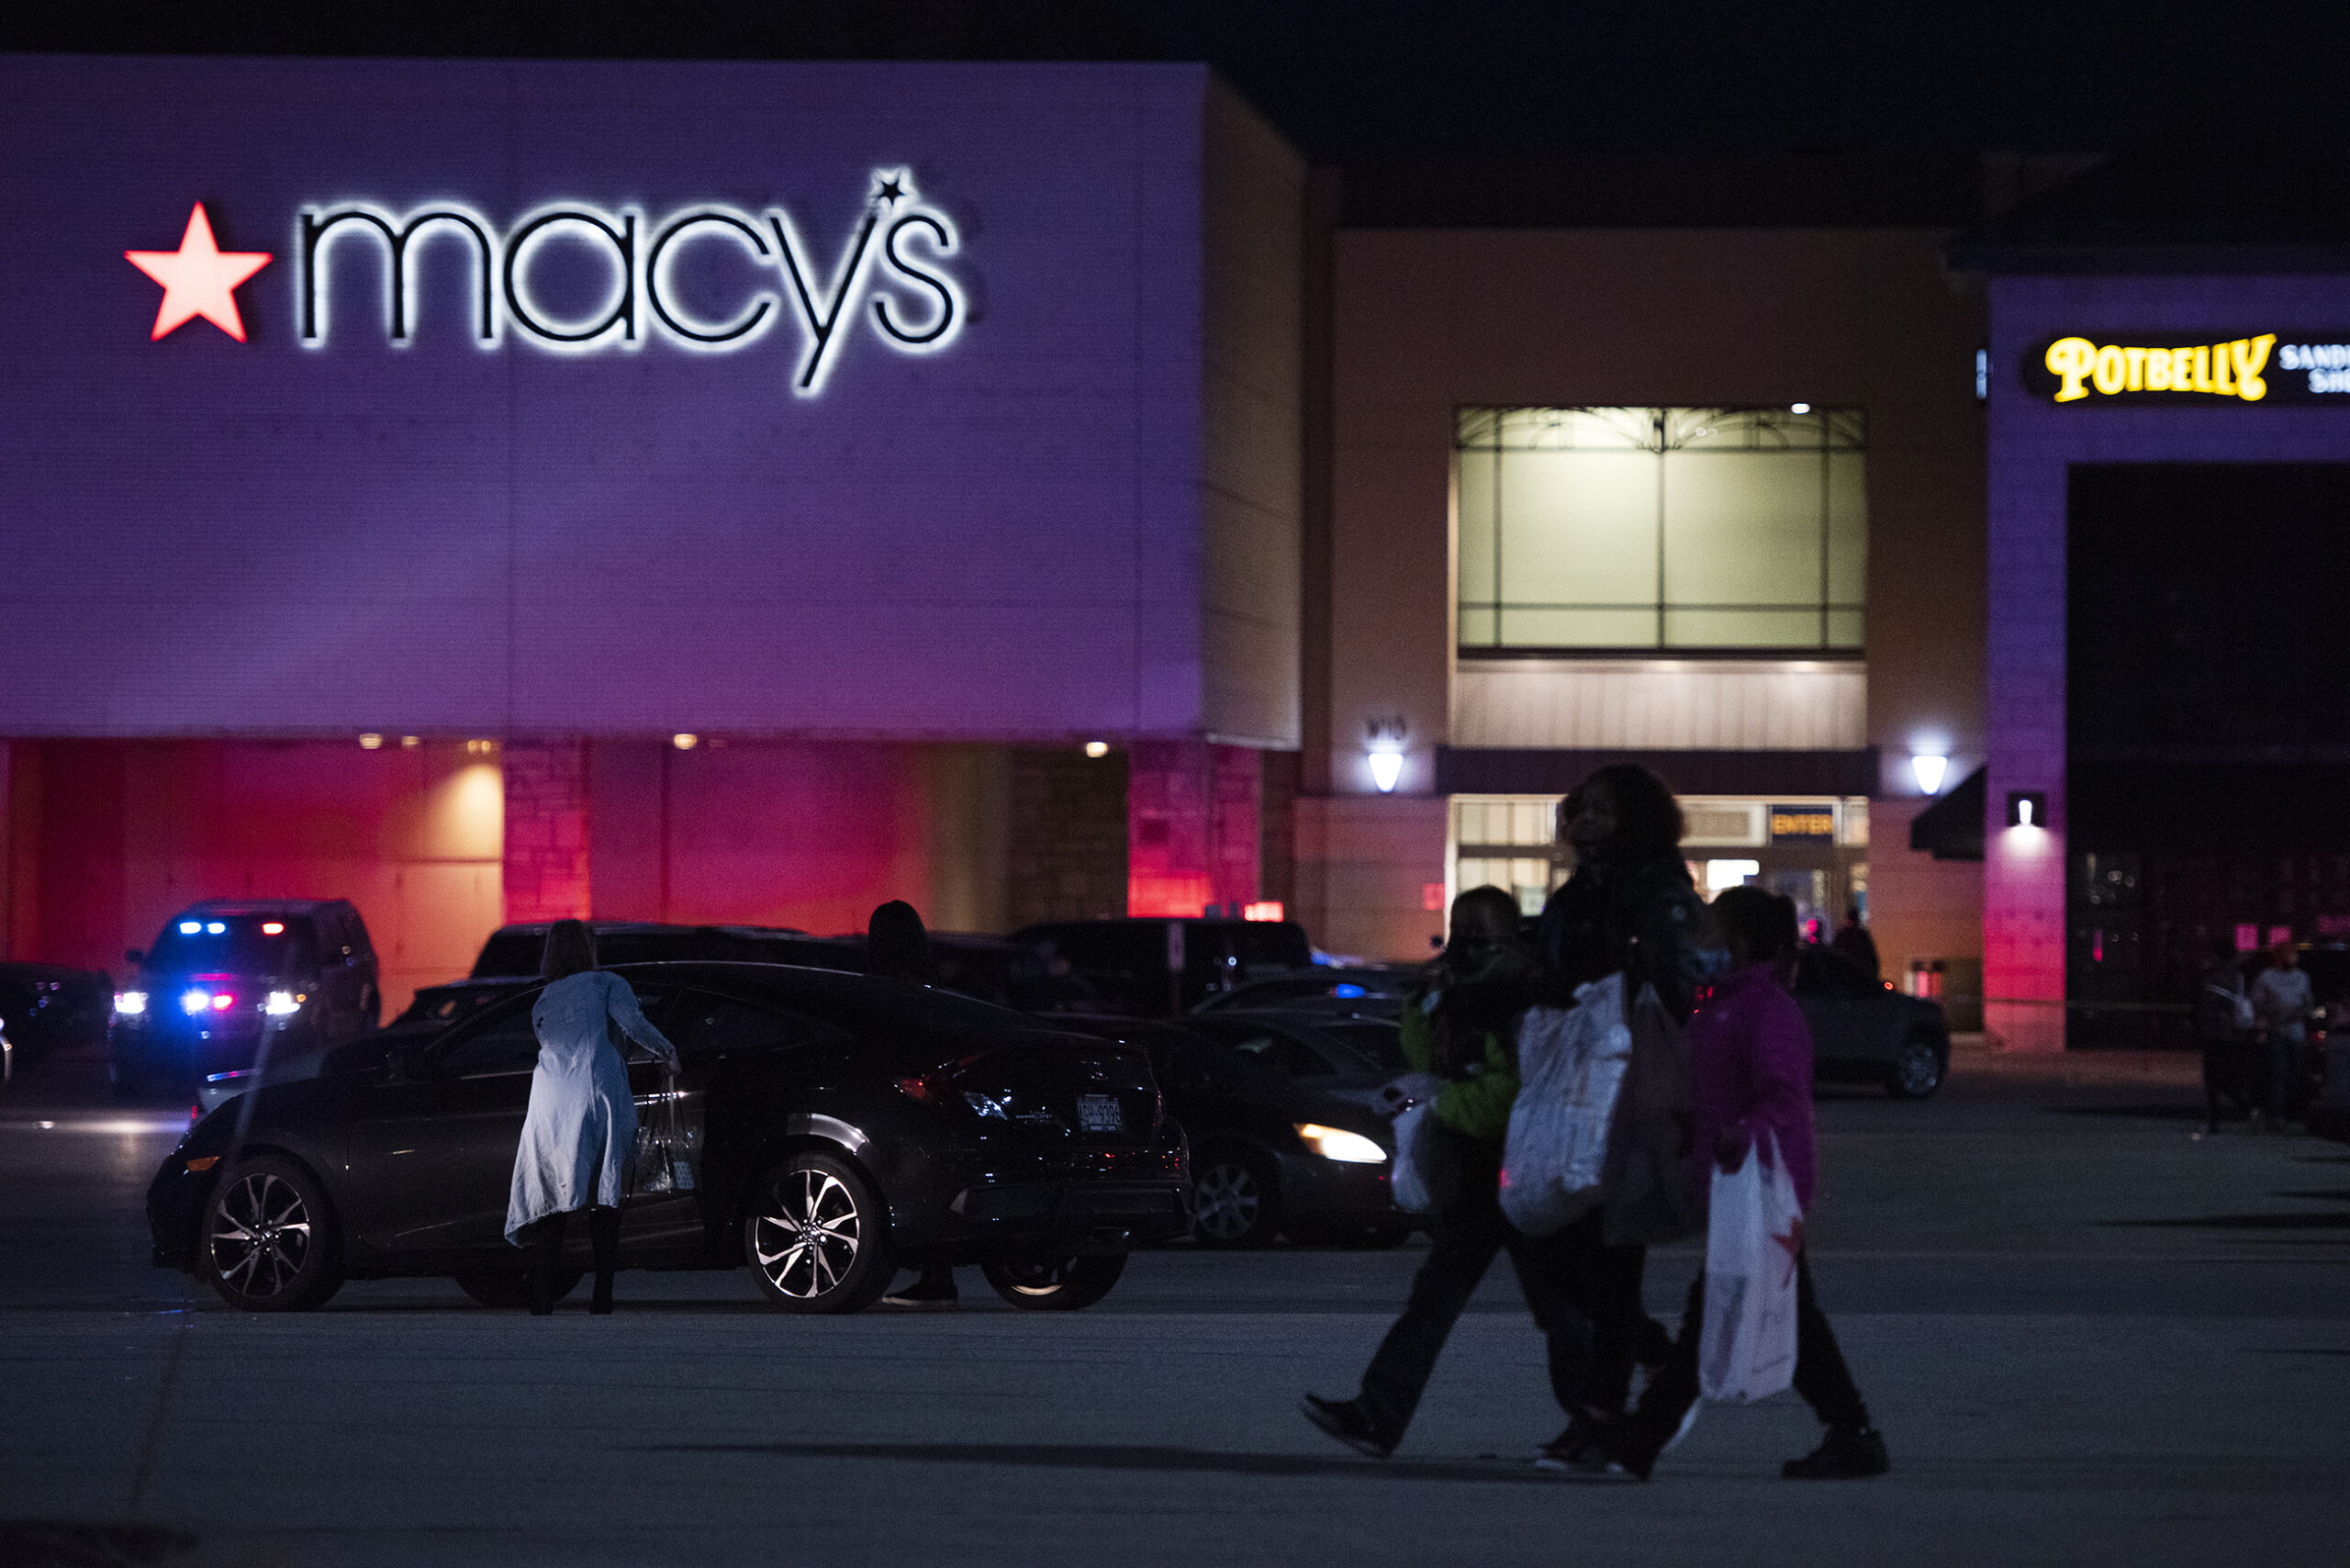 Three people with white shopping bags pass through a dark parking lot in front of a Macy's